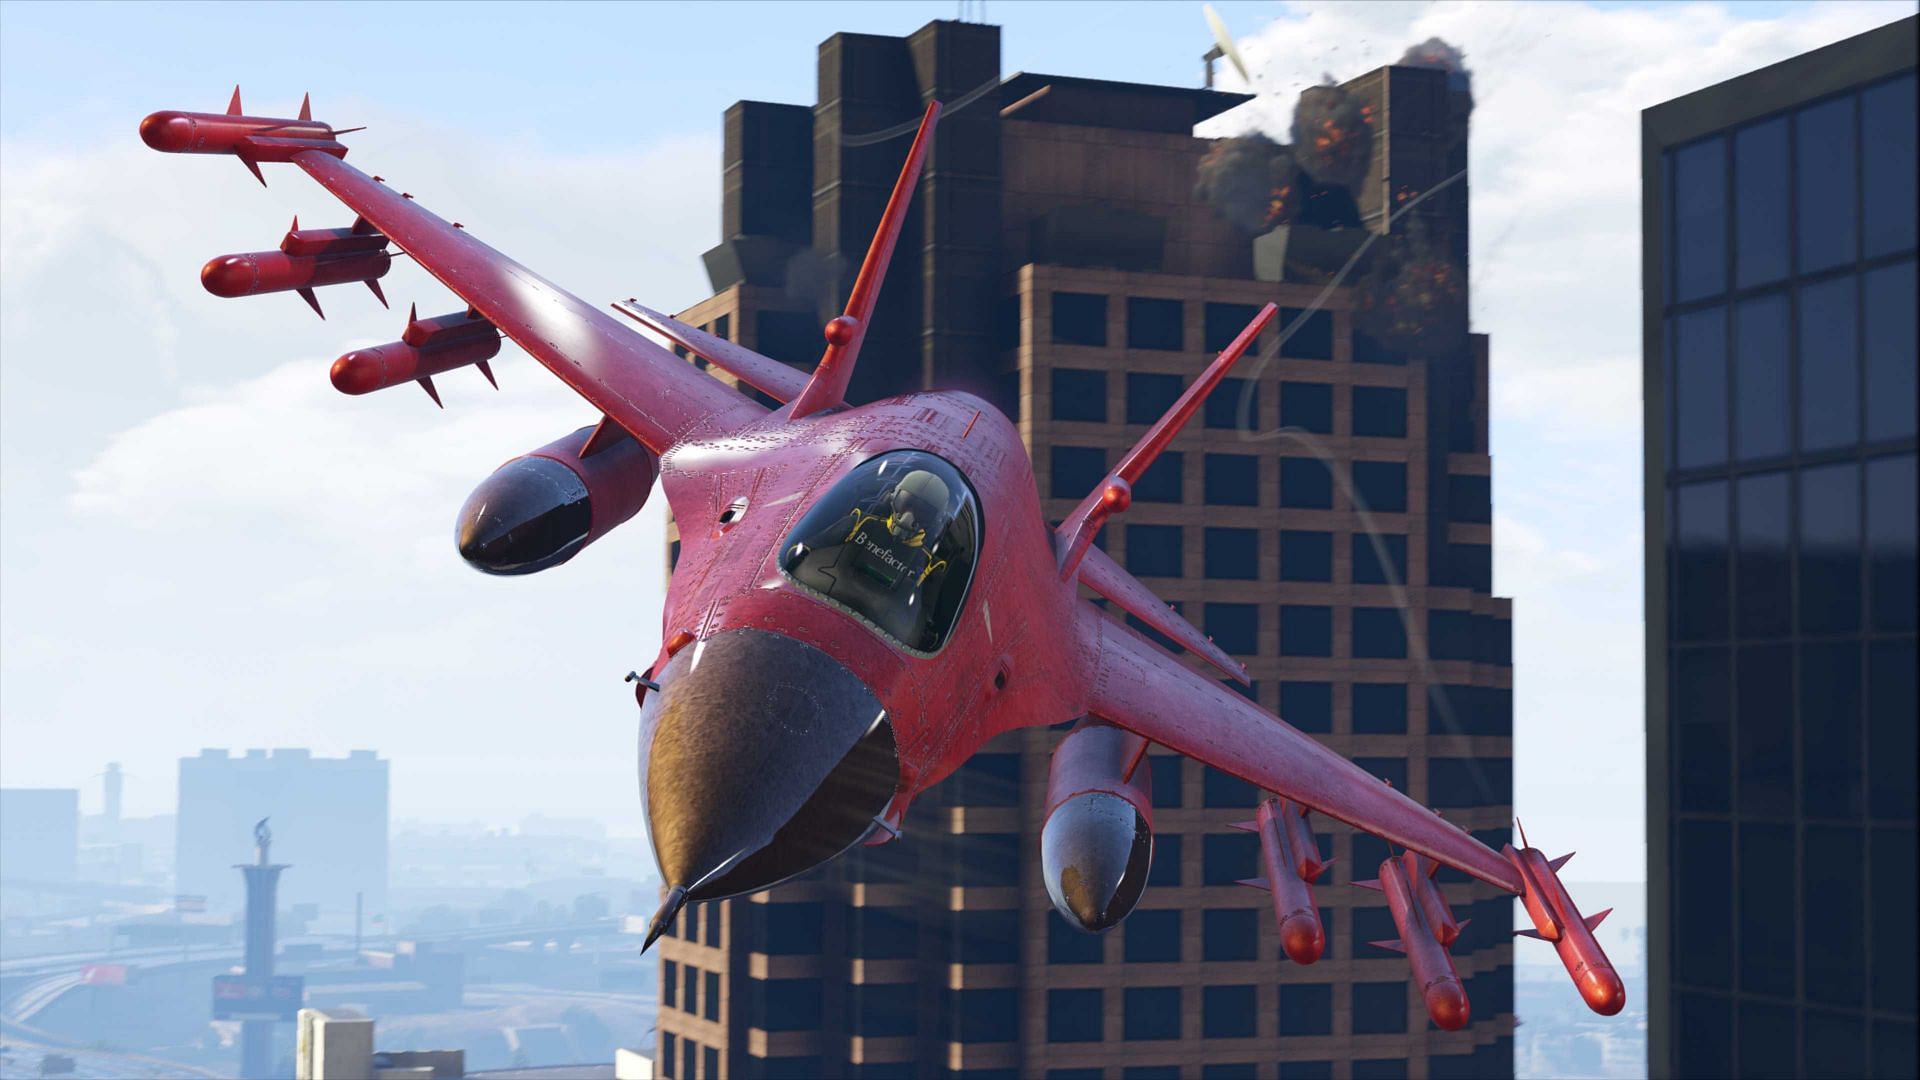 The P-996 LAZER in action (Image via Rockstar Games)